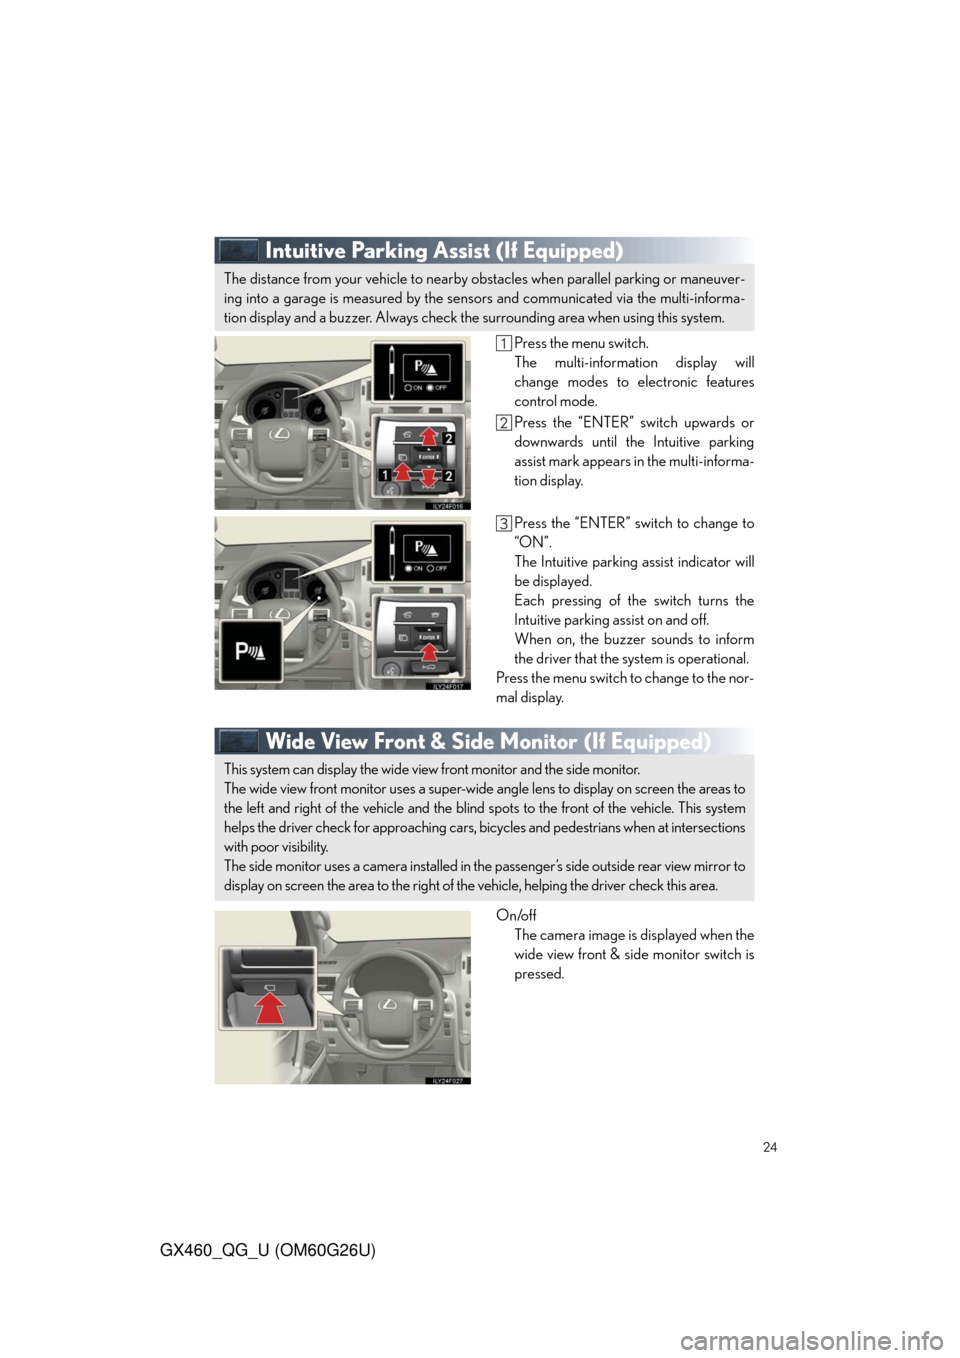 Lexus GX460 2011  Opening, Closing And Locking The Doors / LEXUS 2011 GX460 OWNERS MANUAL QUICK GUIDE (OM60G26U) 24
GX460_QG_U (OM60G26U)
Intuitive Parking Assist (If Equipped)
Press the menu switch.
The multi-information display will
change modes to electronic features
control mode.
Press the “ENTER” switch